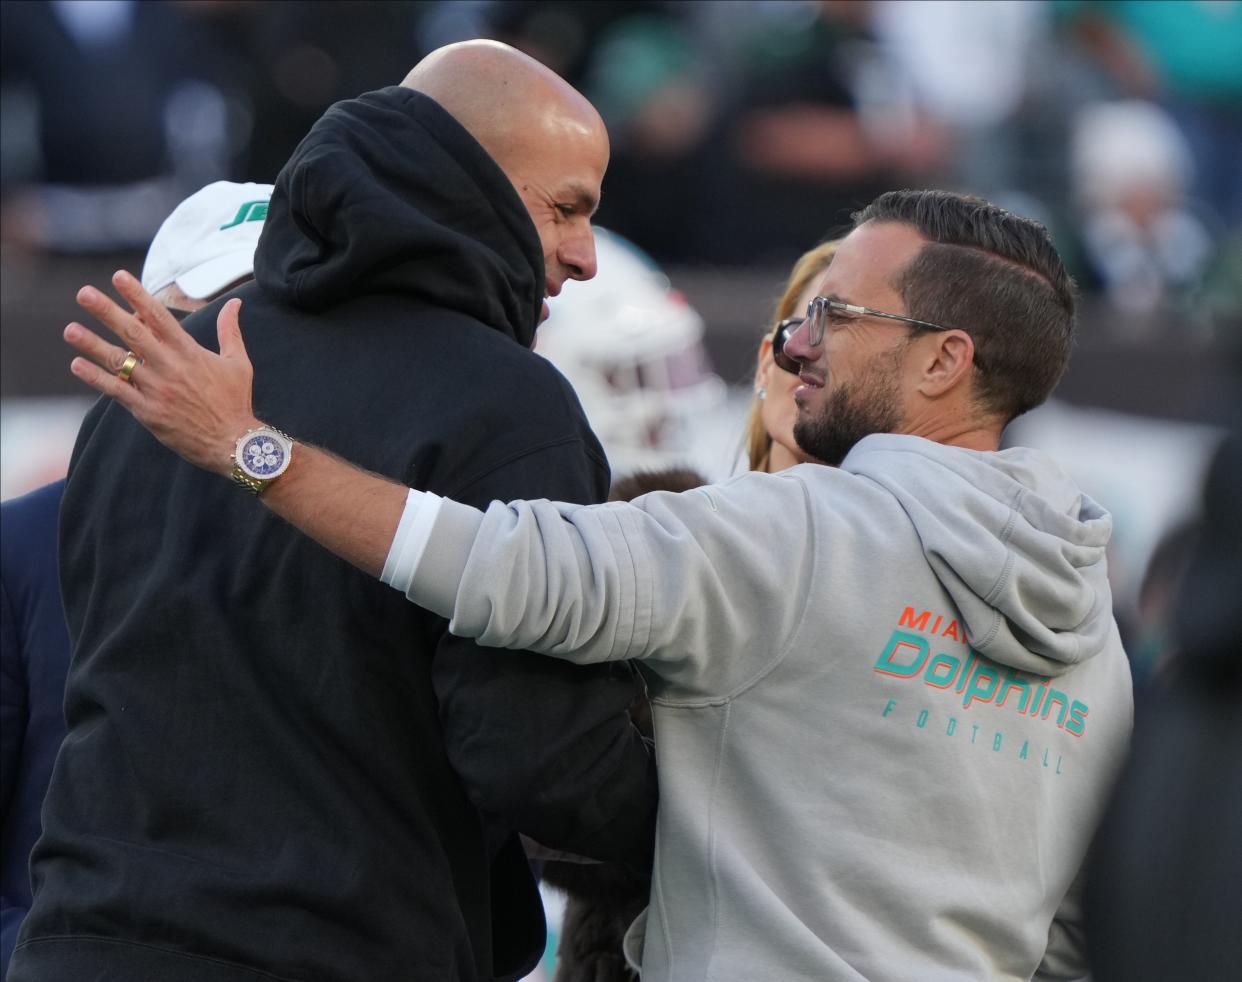 East Rutherford, NJ â€” November 24, 2023 -- Jet head coach Robert Saleh, and Miami head coach Mike McDaniel during pre game warm ups. The NY Jets host the Miami Dolphins at MetLife Stadium on November 24, 2023 in East Rutherford, NJ to play in the first â€œBlack Fridayâ€ NFL game.